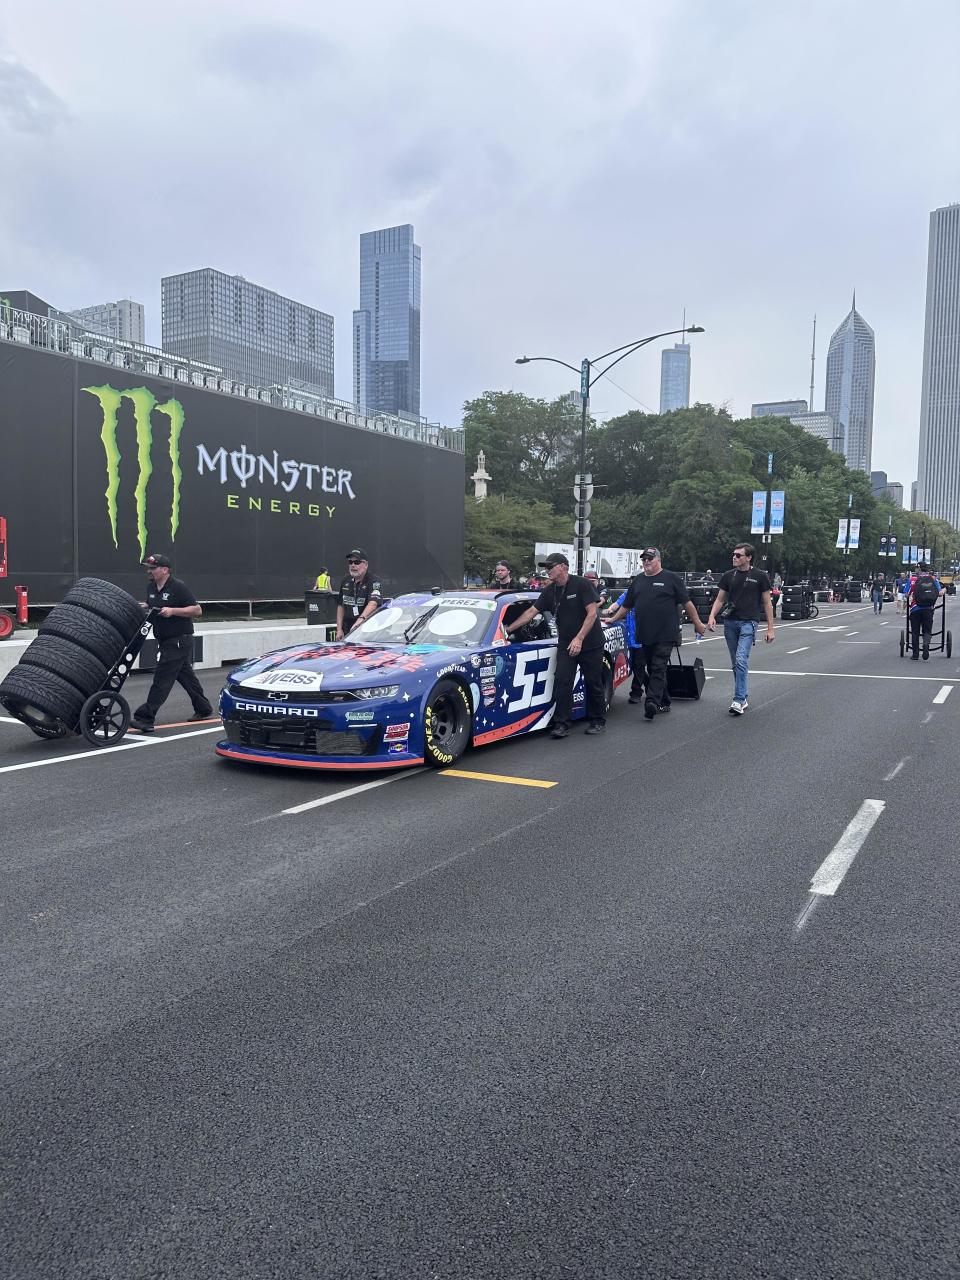 In the bustling atmosphere of Grant Park, dedicated crews position their racing vehicles for some of the final rounds of inspections.  / Credit: Analisa Novak/CBS News